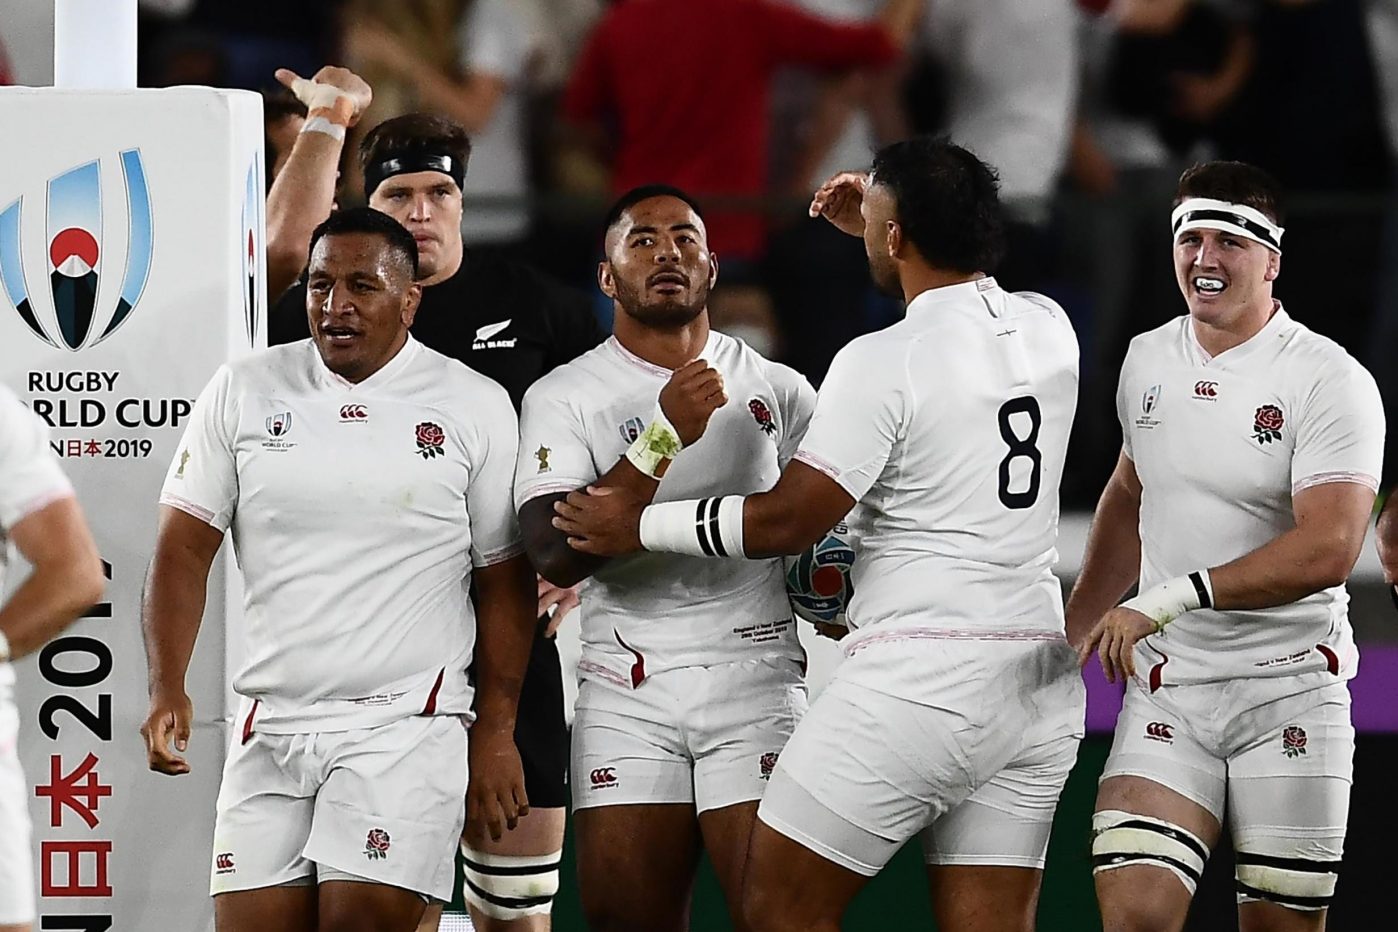 England Beat New-Zealand in a world cup semi final